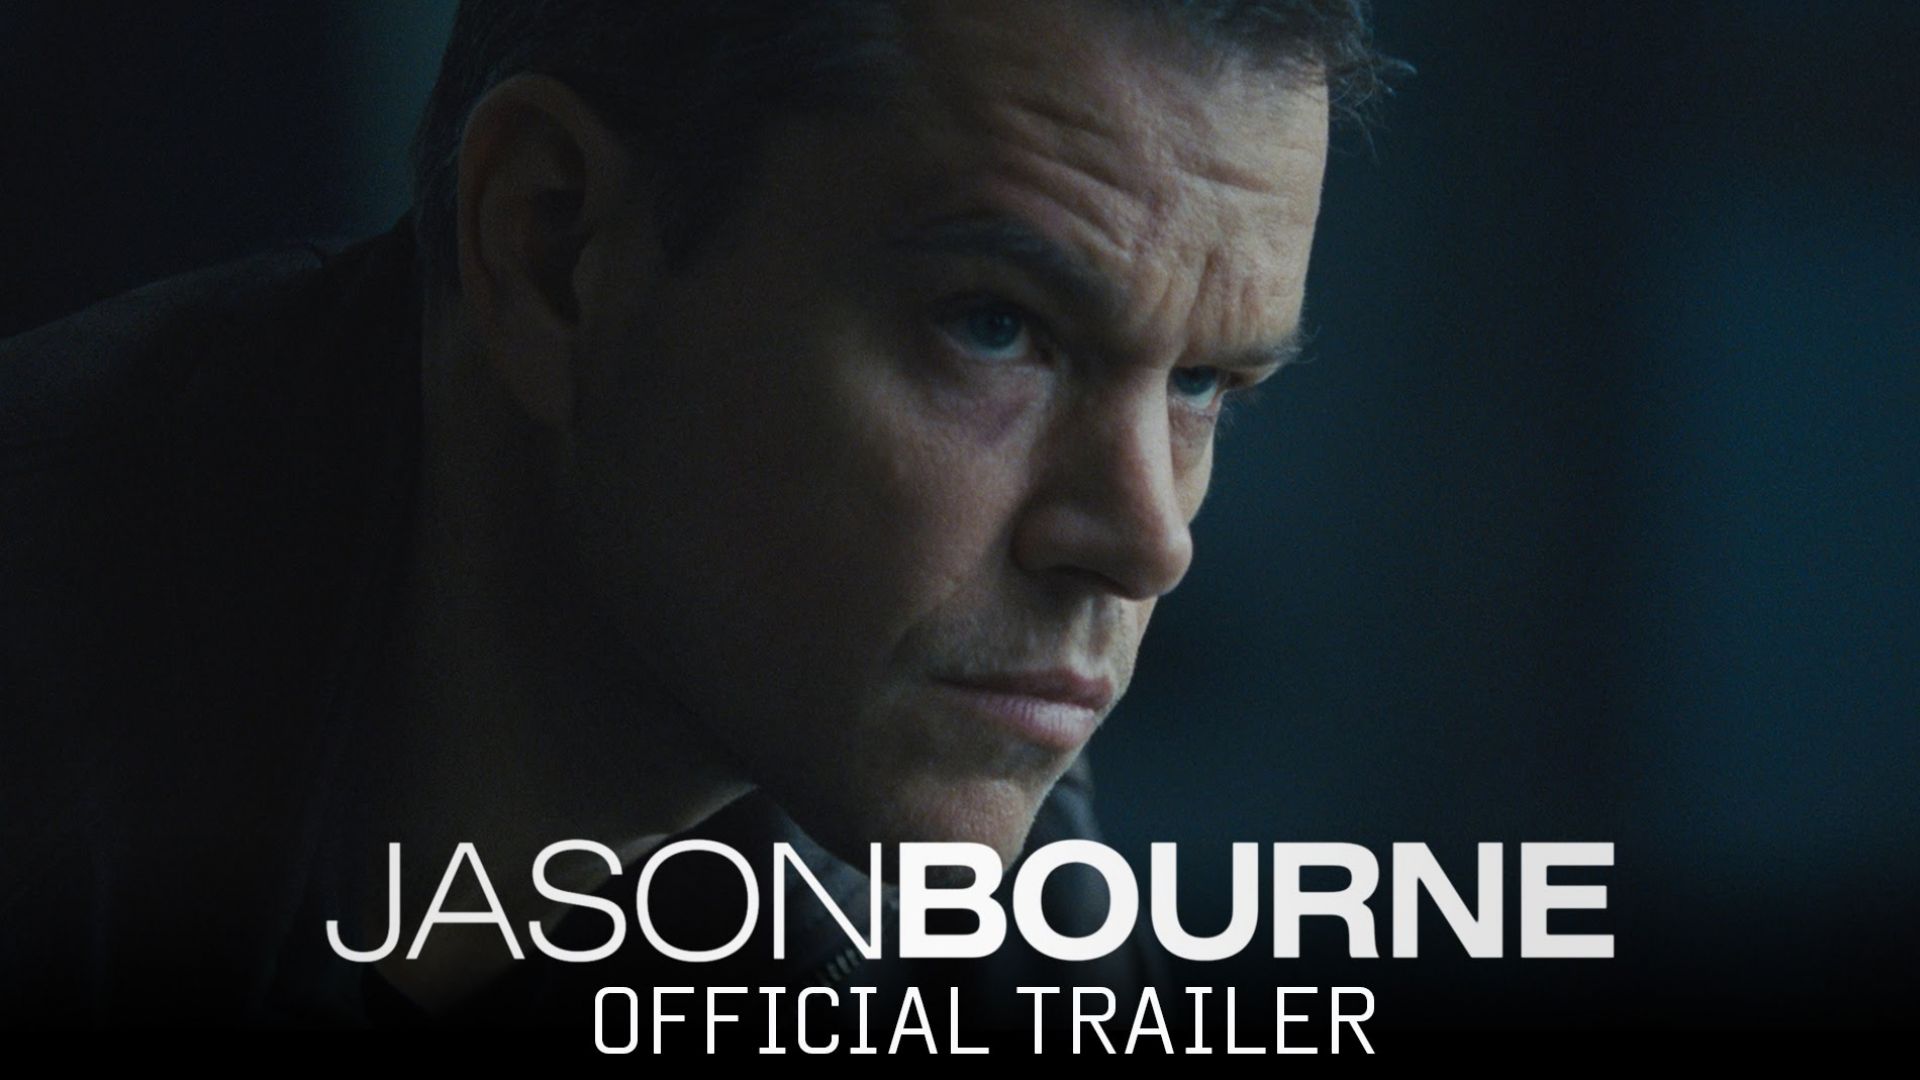 Matt Damon and Paul Greengrass are back with a bang: Officia